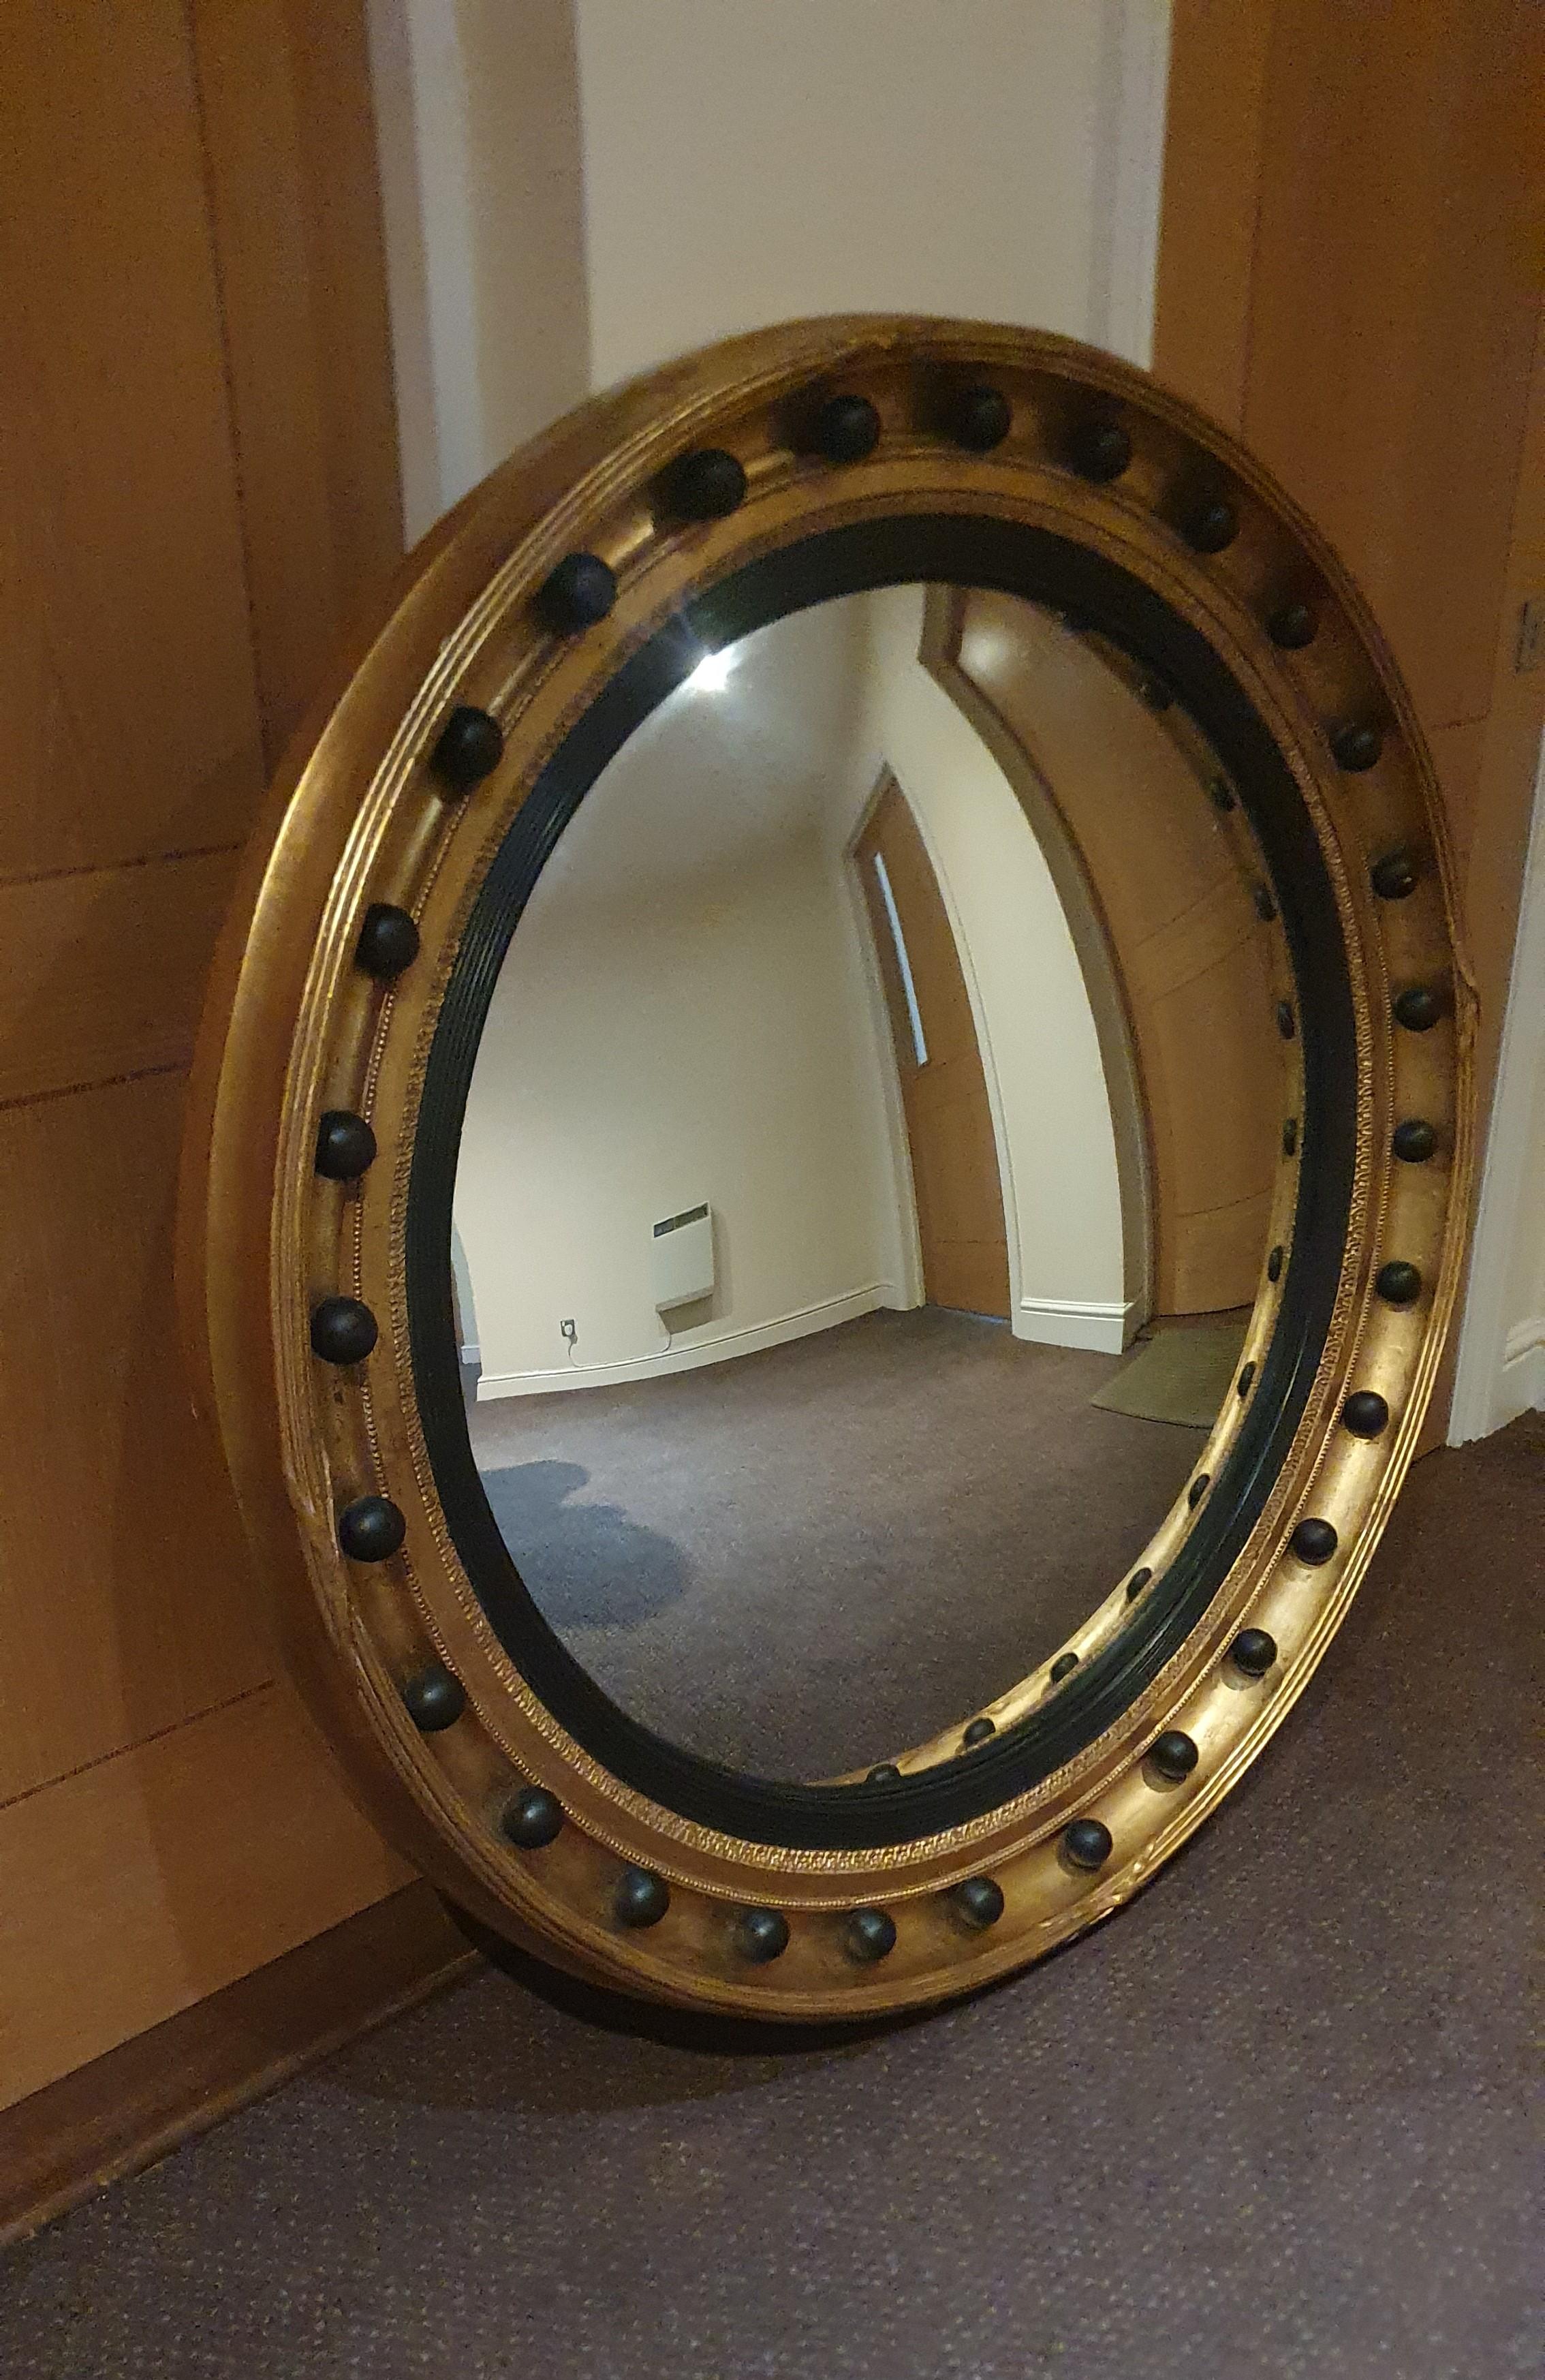 A very fine and unusually large English Regency style convex mirror set in a super thick and deep hand carved Giltwood frame finished in Oil Gilding with Ebonized details

This is a very large mirror and frame, the overall diameter is 118cm and the